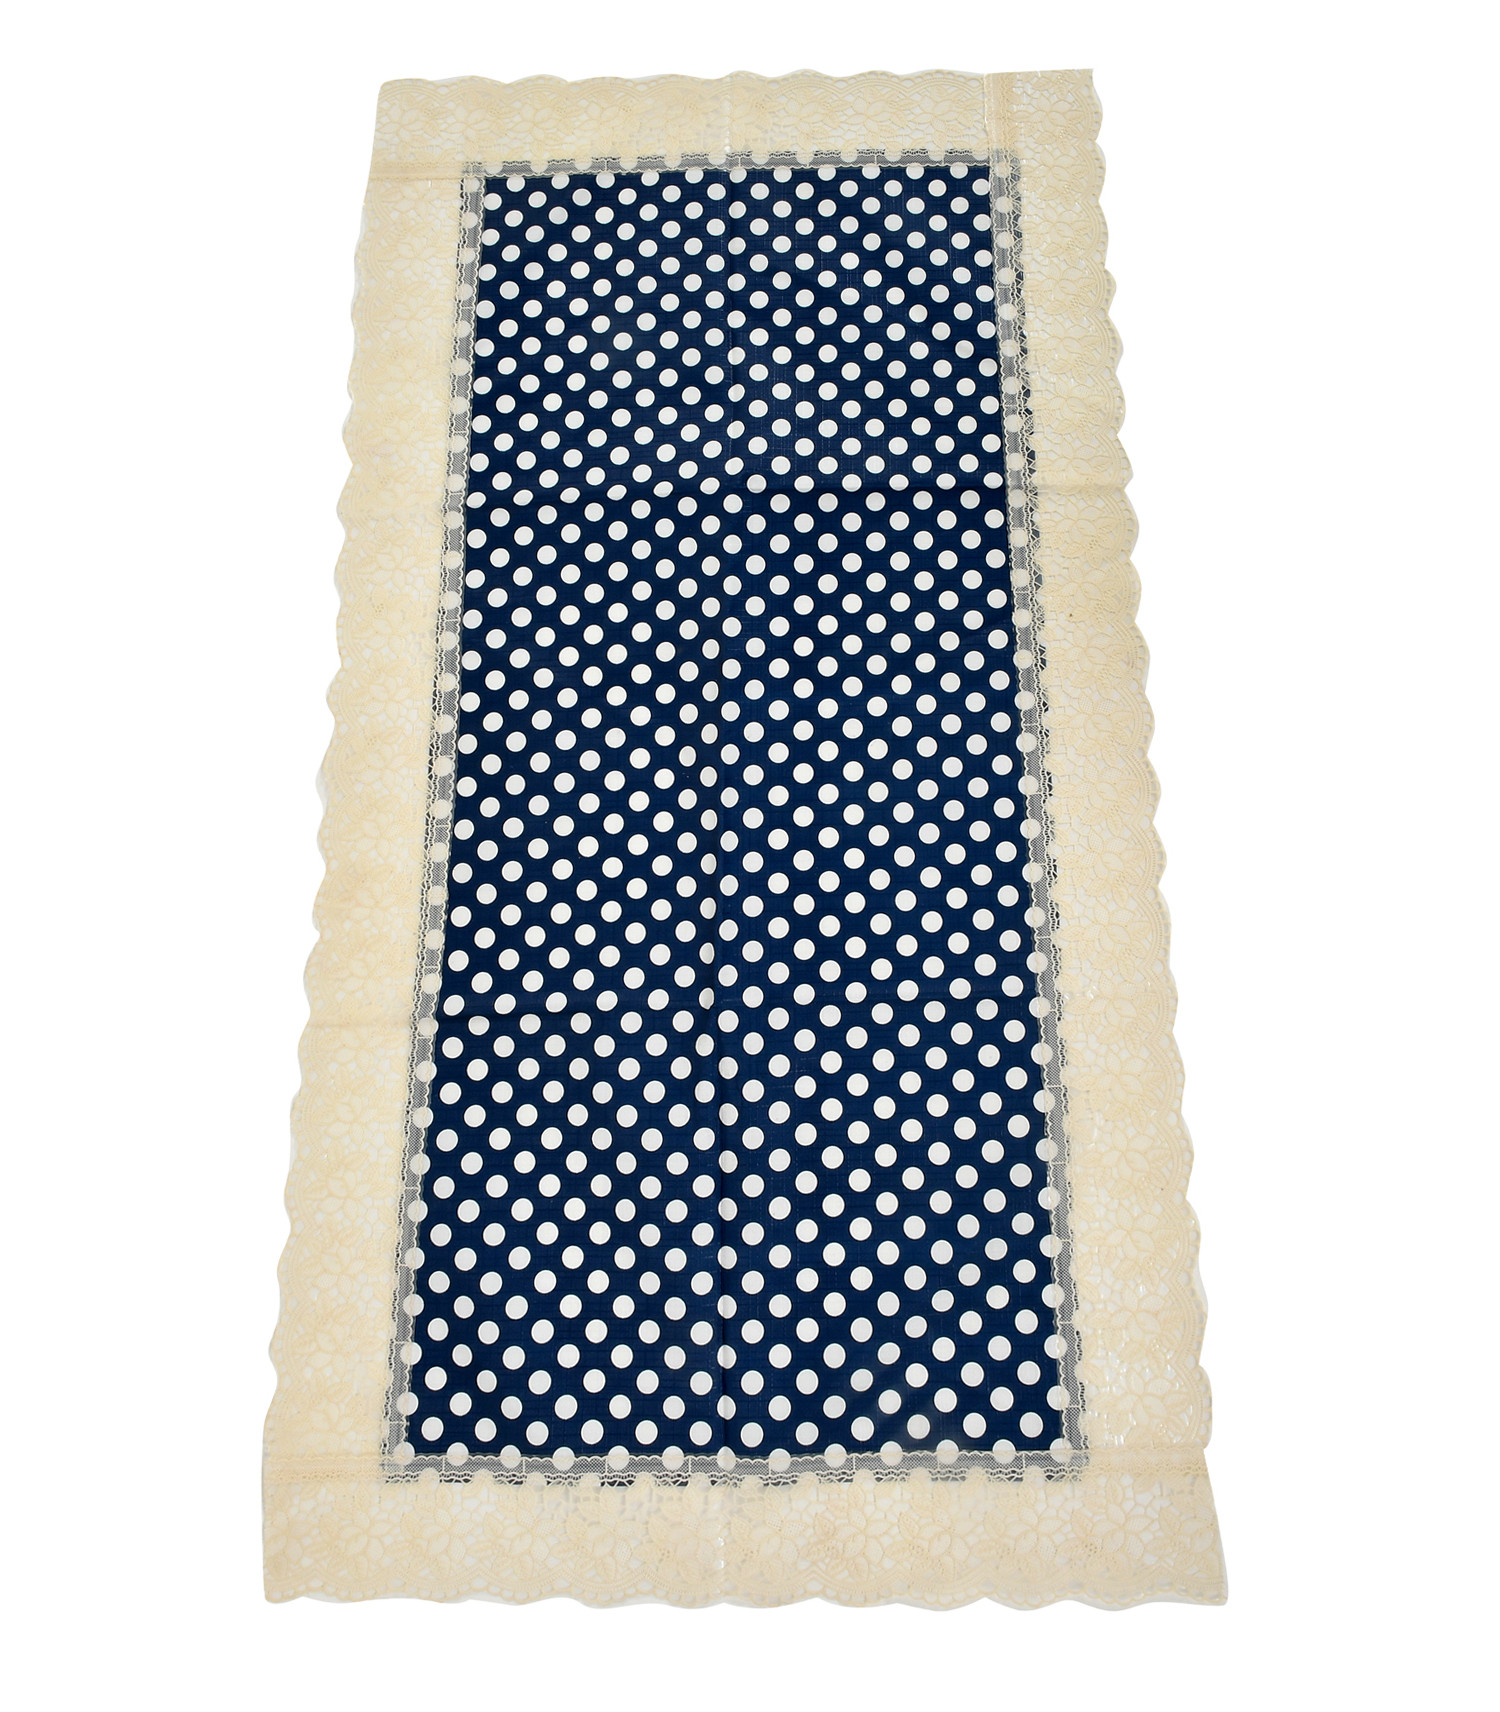 Kuber Industries Dot Printed PVC Table Runner For Farmhouse Dinner, Holiday Parties, Wedding, Events, Décor, 18